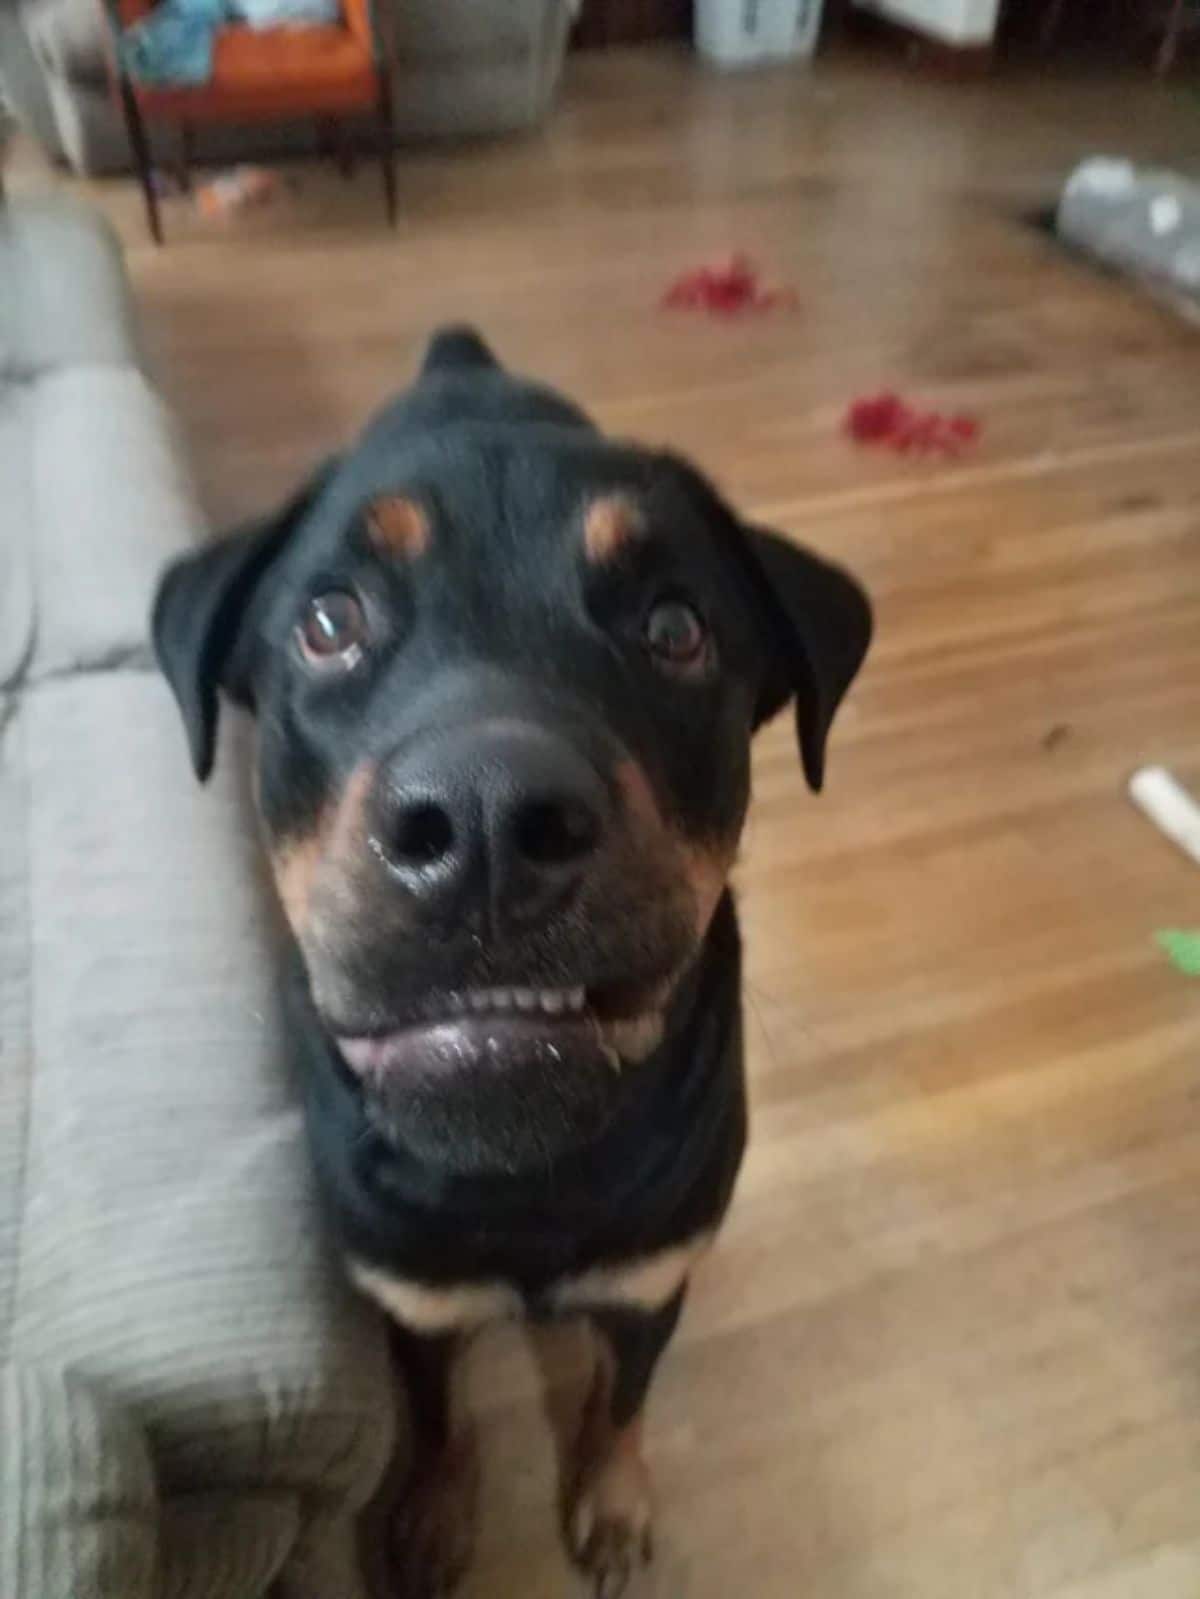 blurry photo of black and brown dog smiling slightly with the teeth showing